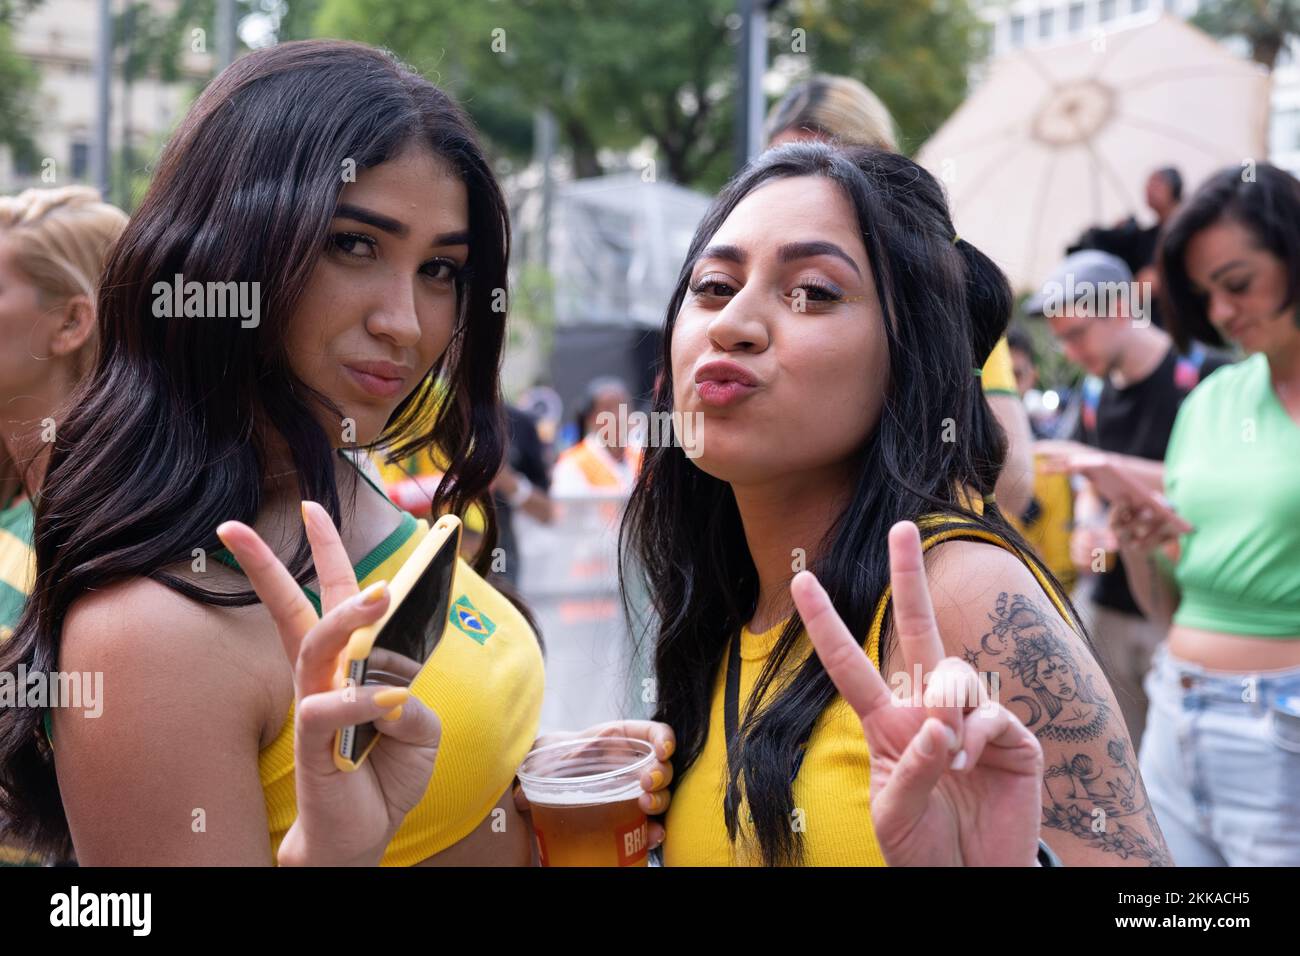 November 24, 2022: brazilian fans reacts to the match between Brazil x Serbia for the 2022 world cup at the fan fest zone in Sao Paulo (Credit Image: © Dario Oliveira/ZUMA Press Wire) Stock Photo